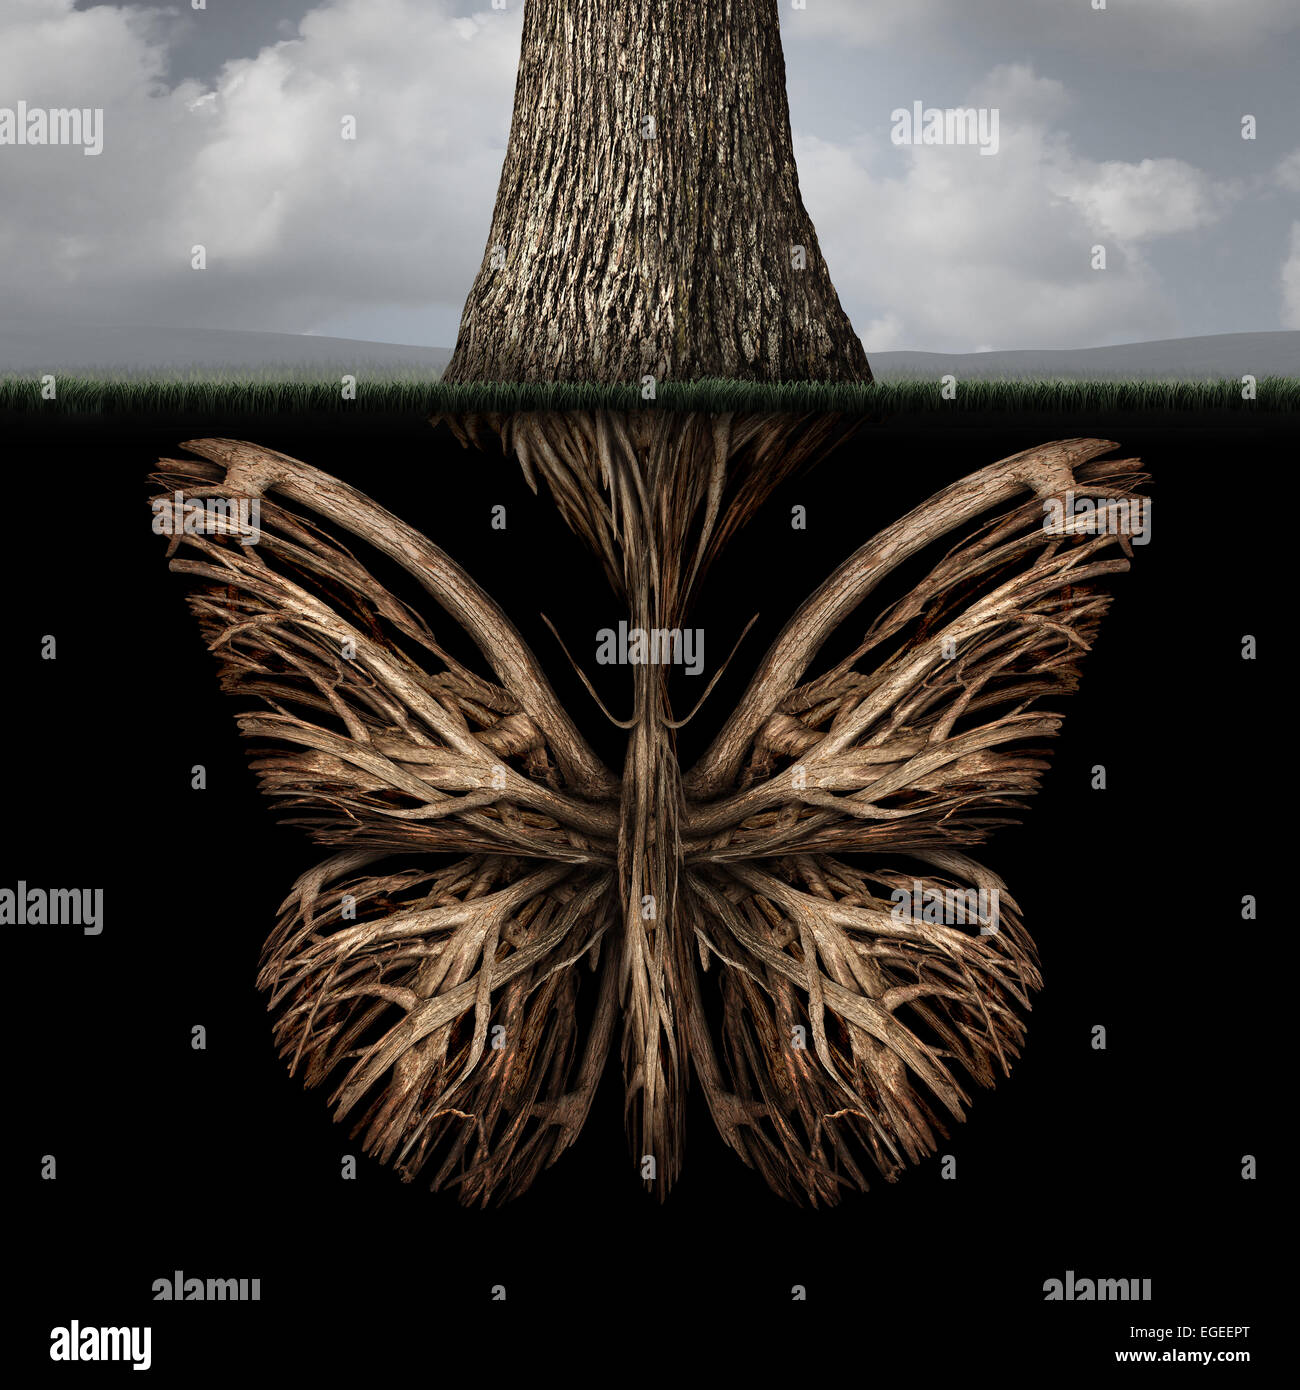 Creative roots concept as a tree with a root shaped as a butterfly as a powerful environmental metaphor or symbol for inner thoughts and strong creativity foundation. Stock Photo